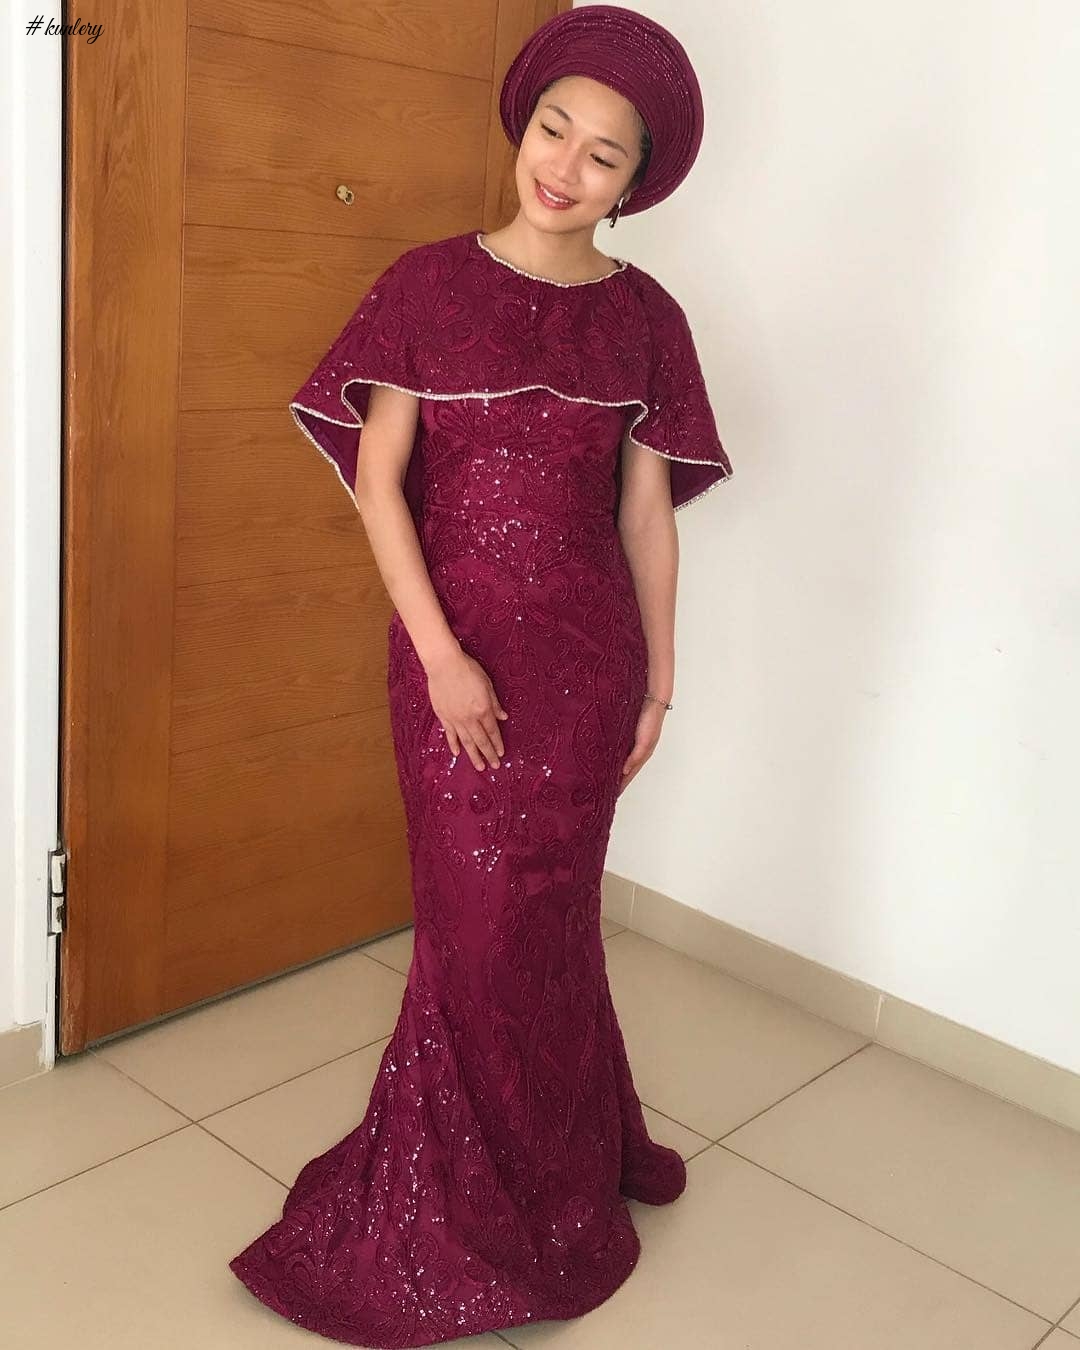 TRENDY AND STYLISH ASO EBI STYLES FASHIONABLE LADIES ARE SLAYING THIS WEEK